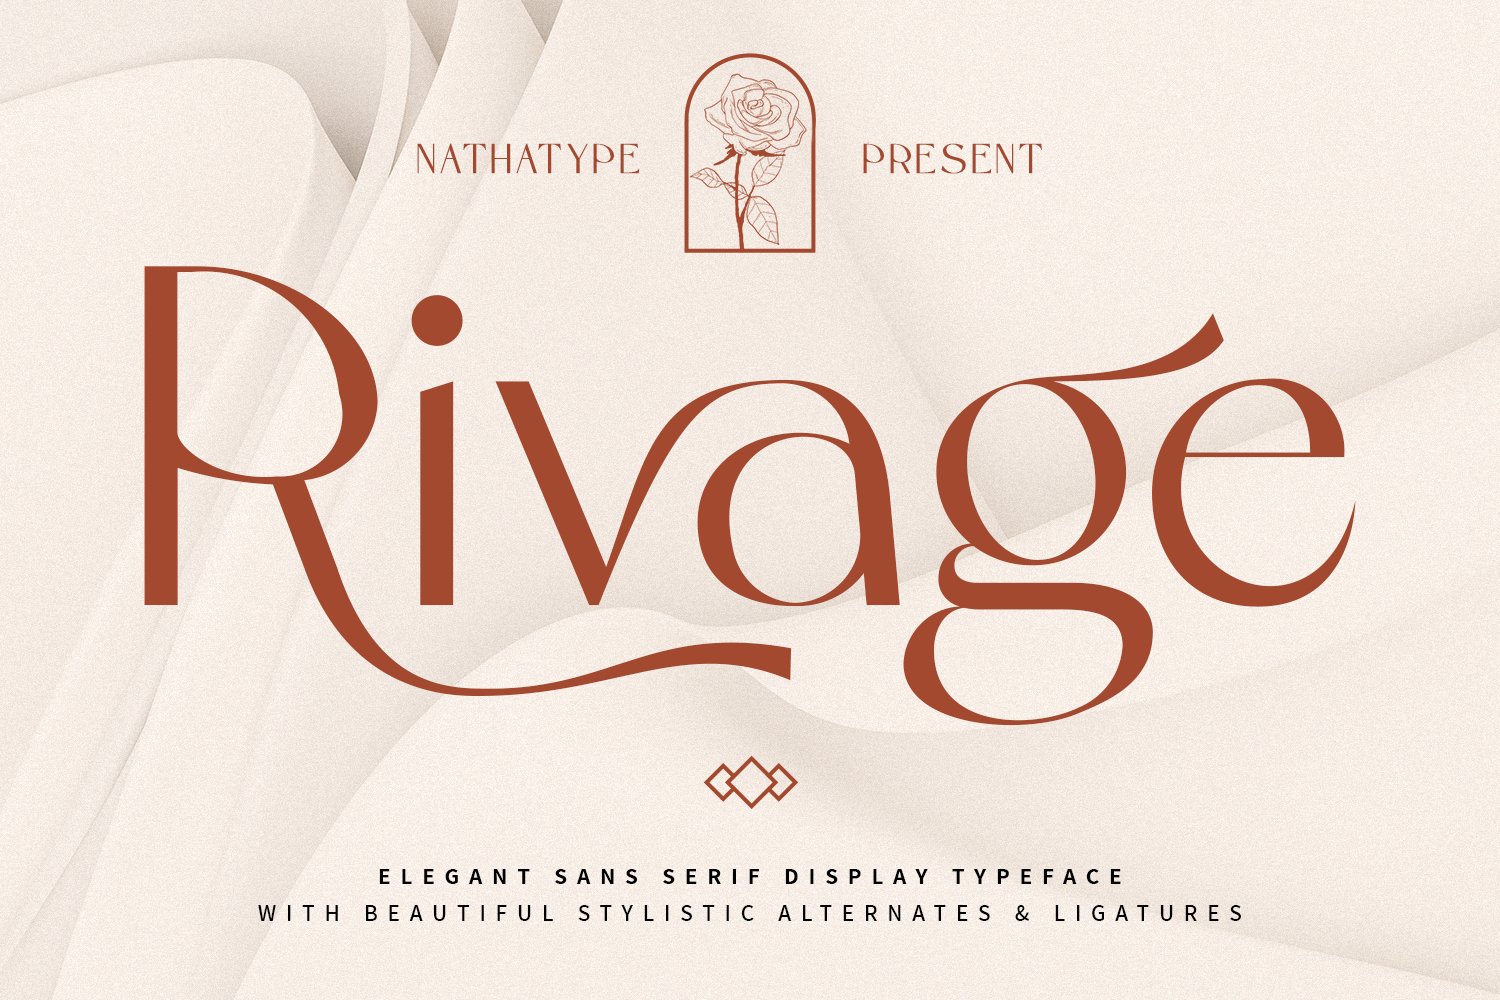 Rivage cover image.